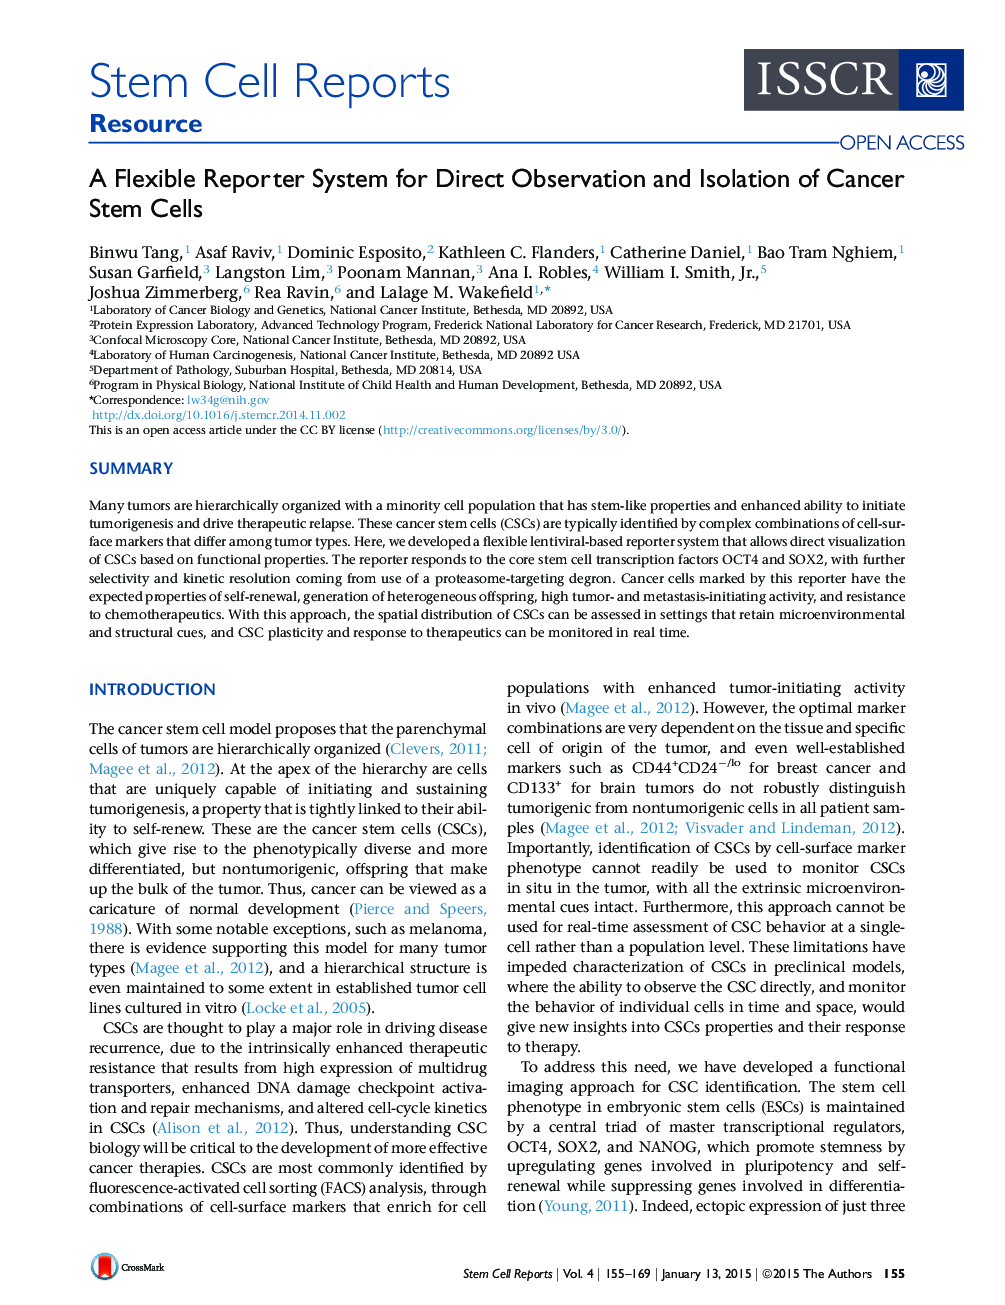 A Flexible Reporter System for Direct Observation and Isolation of Cancer Stem Cells 